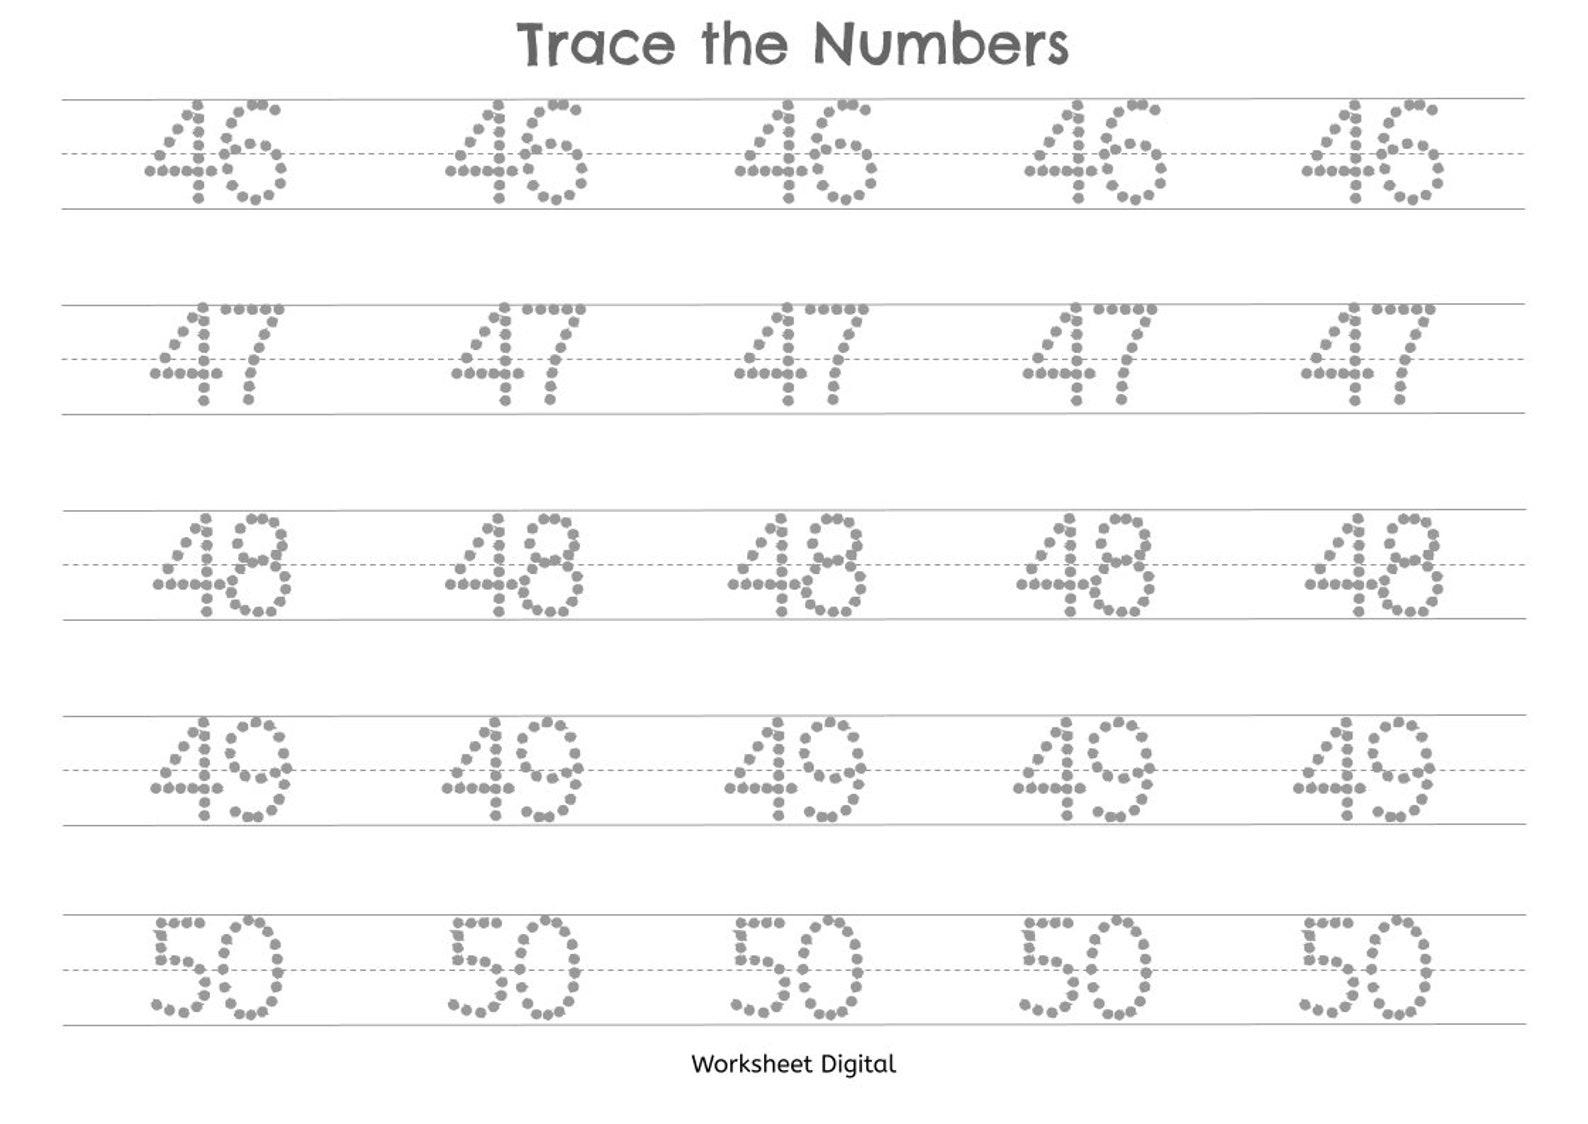 trace-numbers-1-100-activity-shelter-trace-numbers-1-100-activity